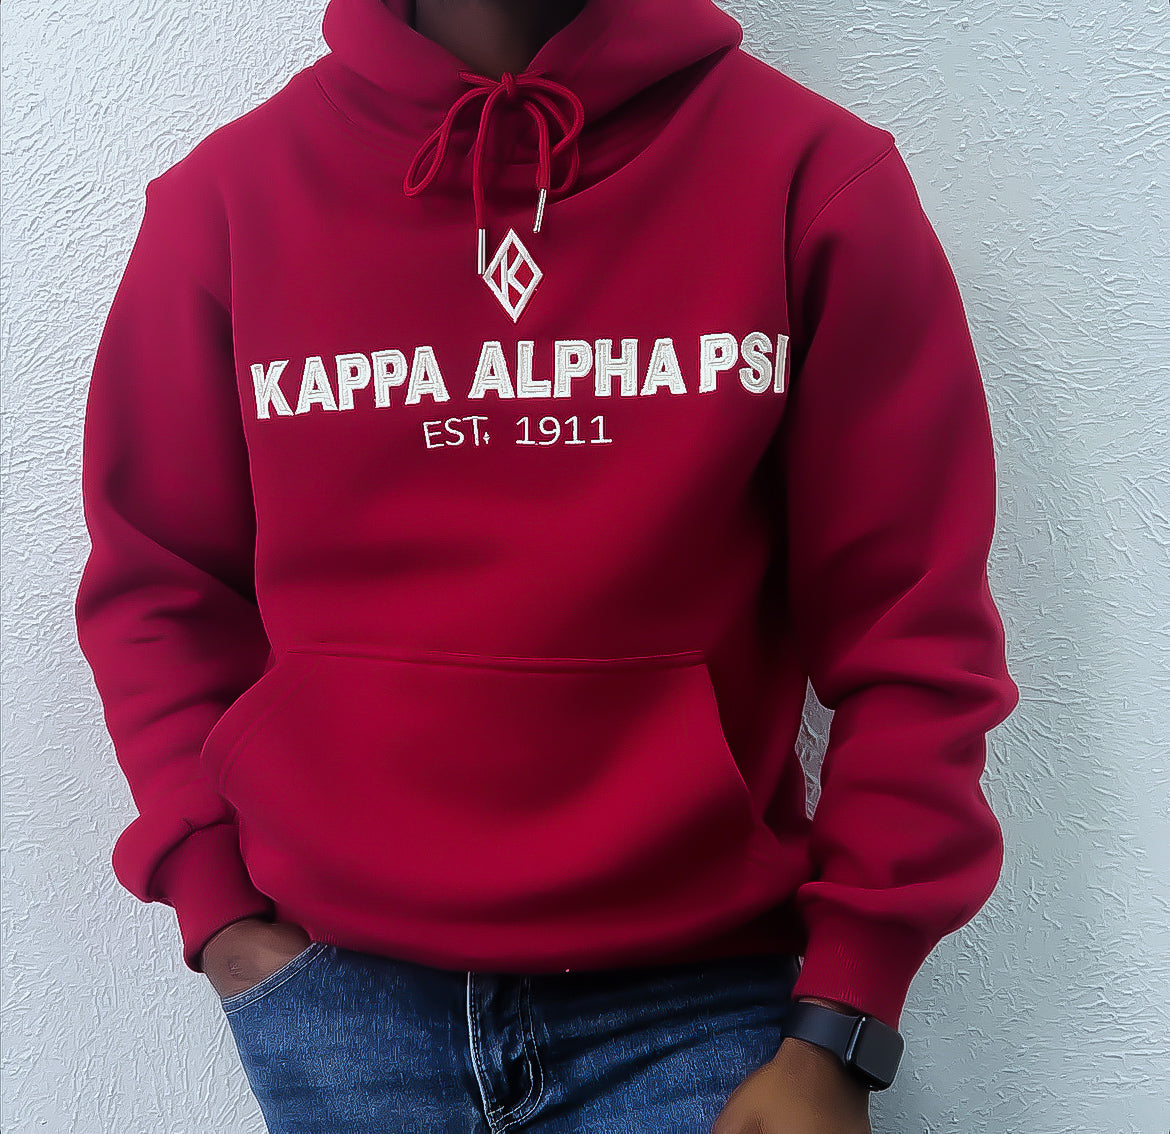 Show off your fraternity pride with this stylish dark red and cream hoodie featuring the Kappa Alpha Psi organization. Perfect for any casual occasion, this hoodie is a must-have for any fraternity member. The bold colors and recognizable logo make a statement while providing comfortable warmth. Represent your organization with pride and stay cozy in this must-have hoodie.
